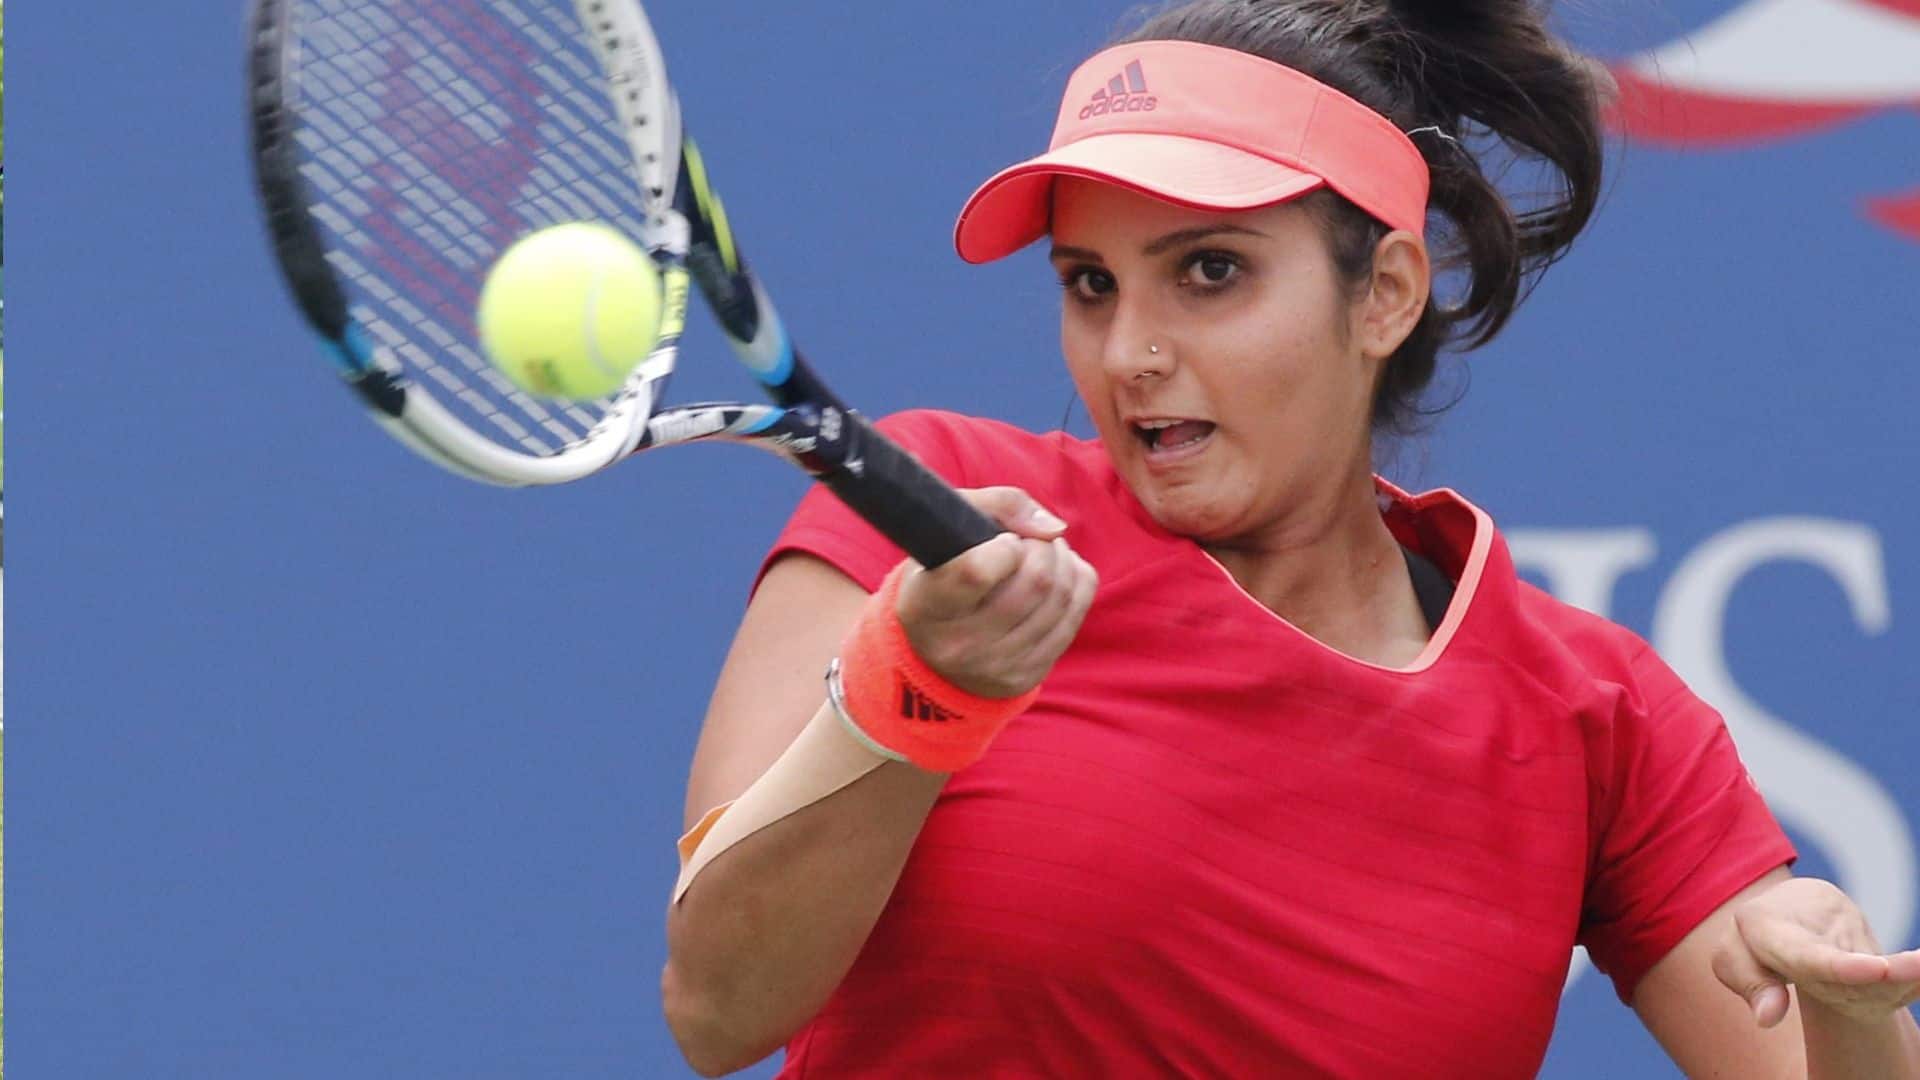 When Shoaib Malik's Ex-Wife Sania Mirza Revealed She Would Rather Play Cricket & Not Tennis